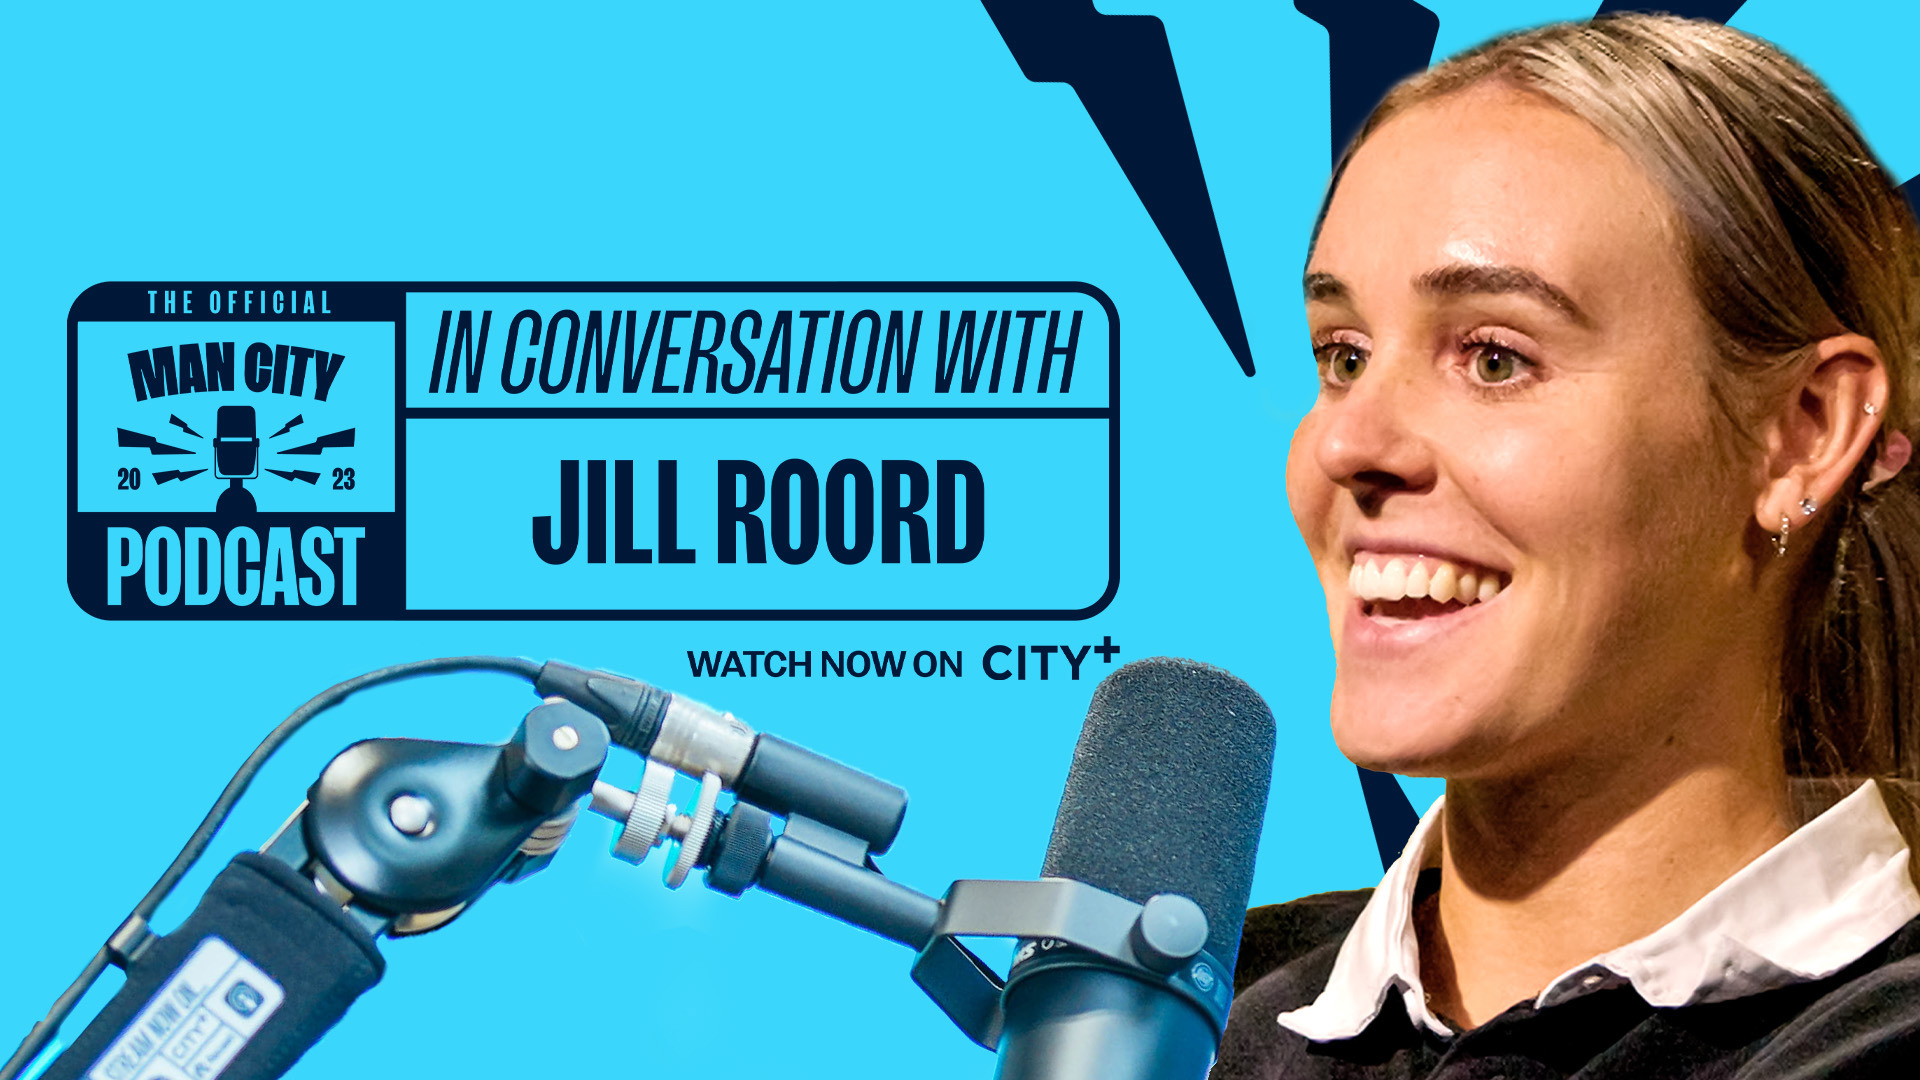 In conversation with Jill Roord | Man City Podcast 